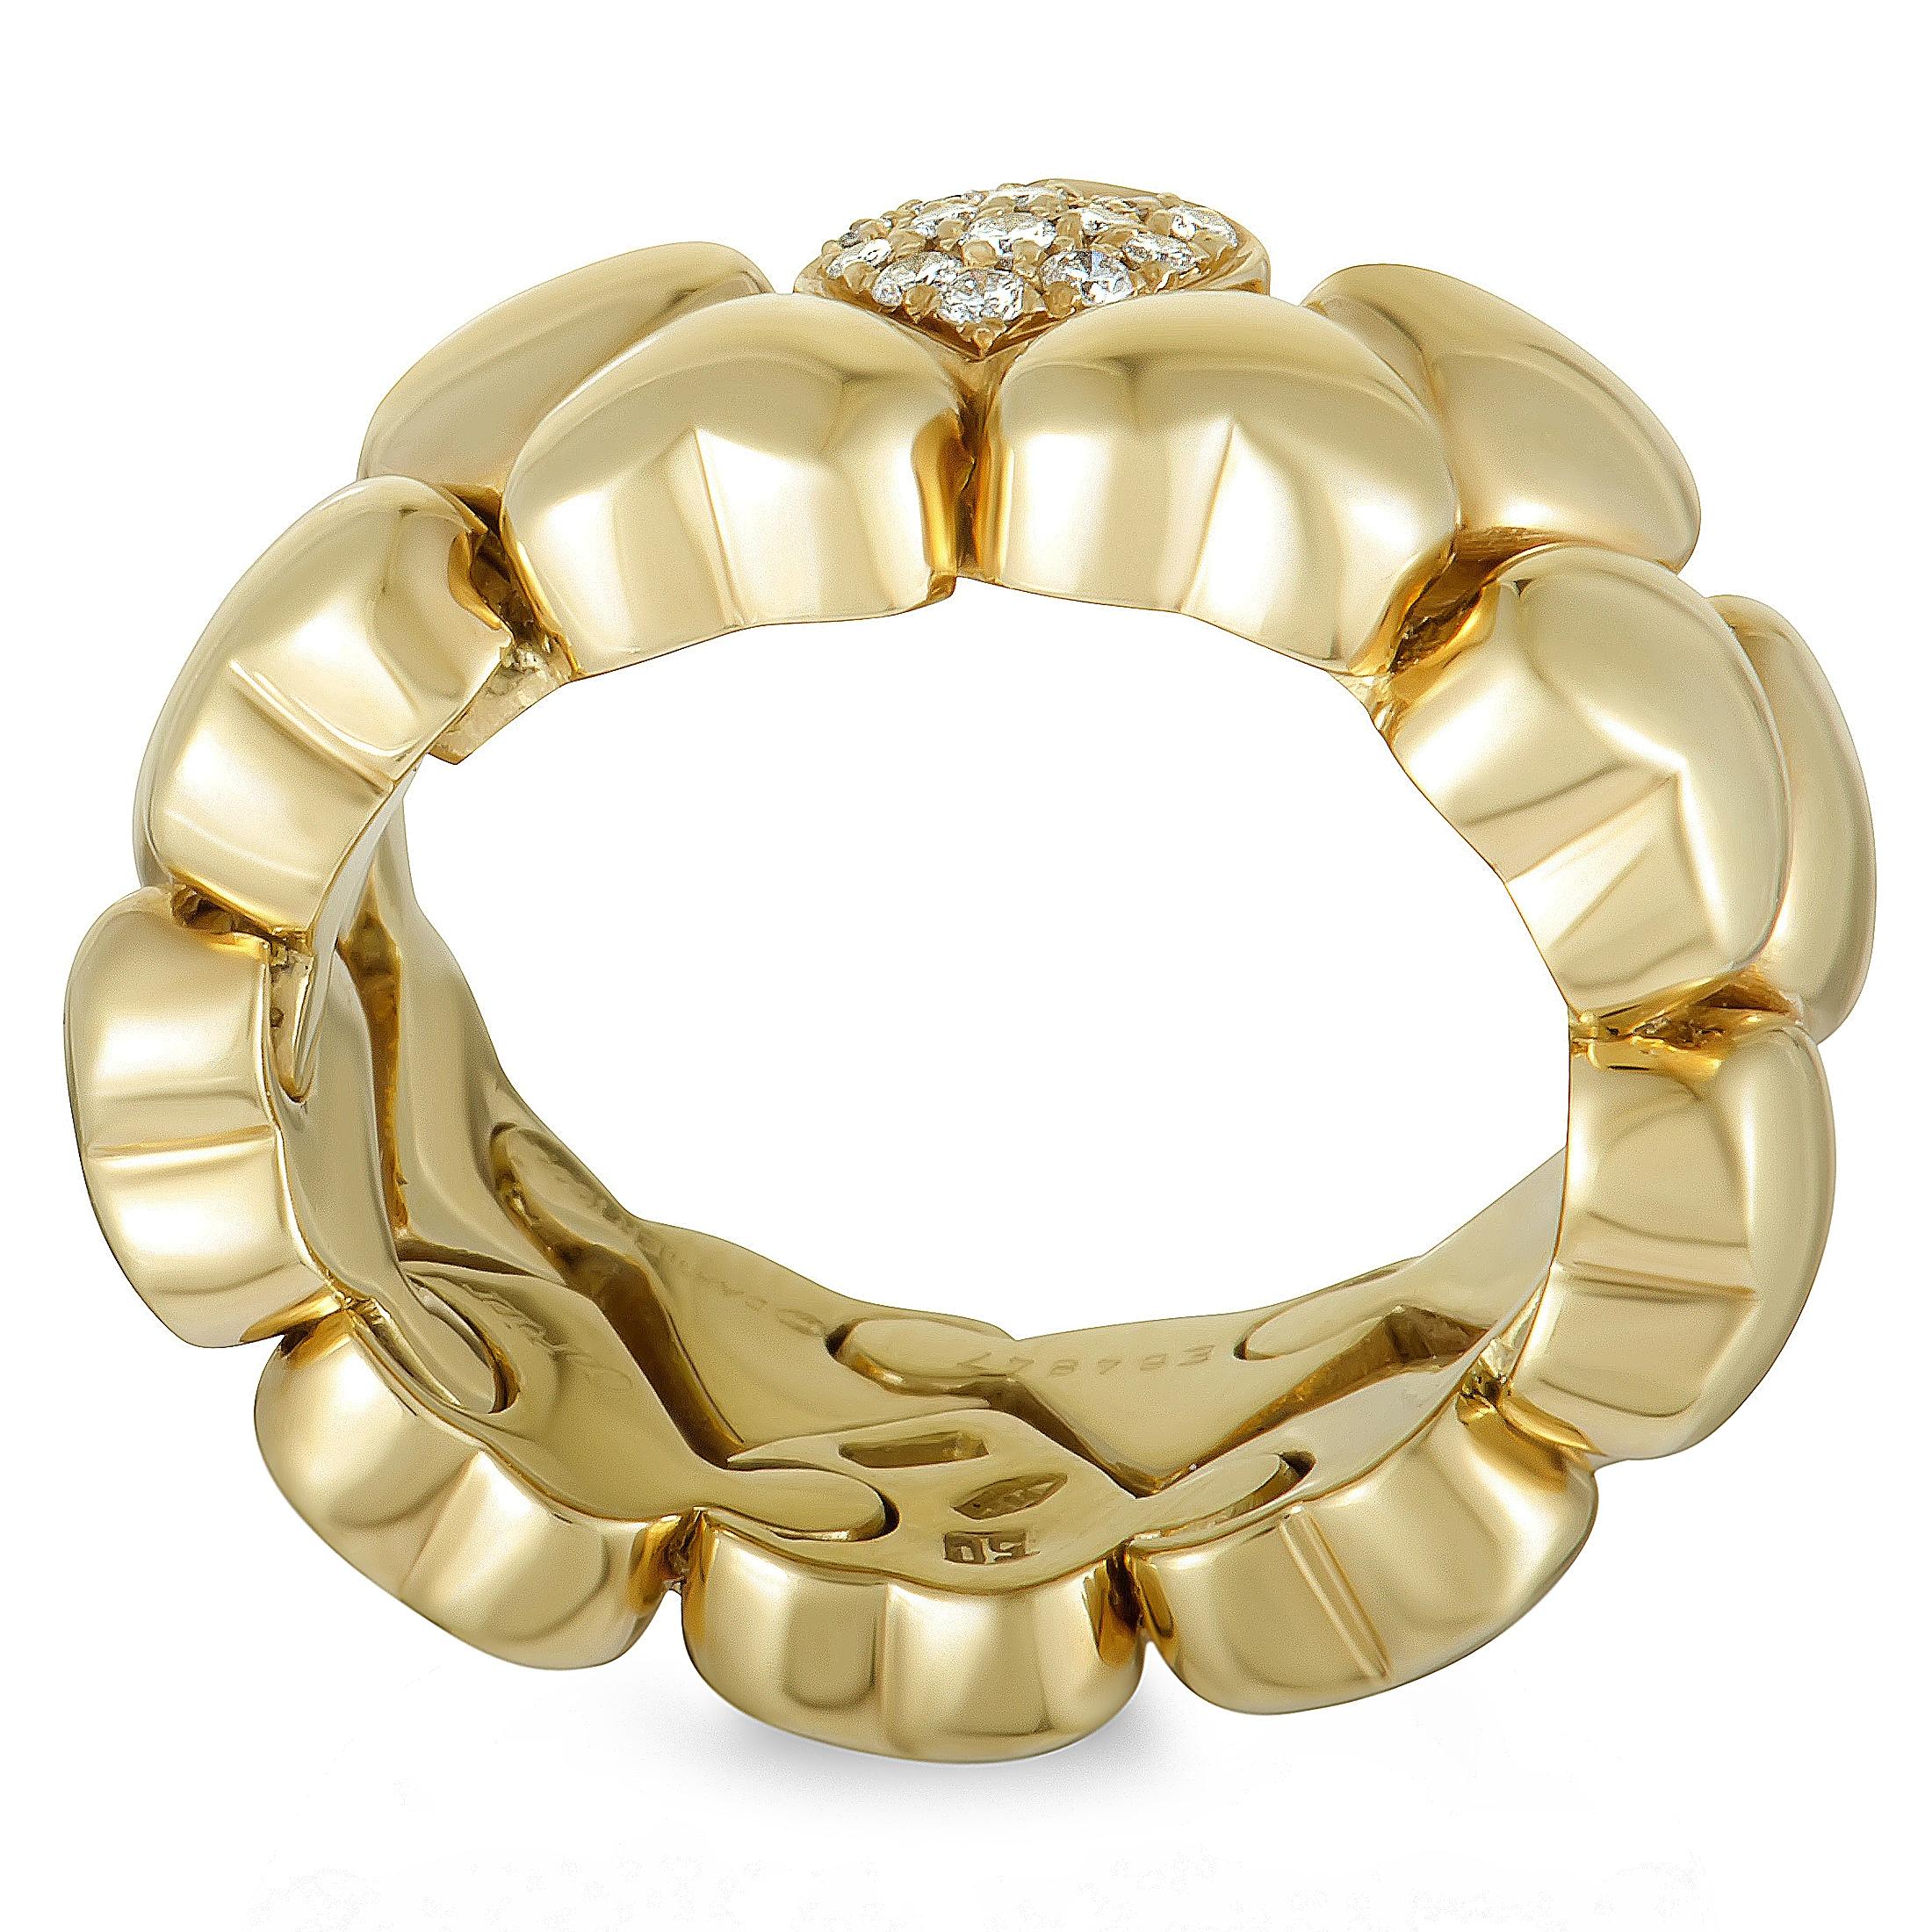 This extraordinarily envisioned piece from Cartier is comprised of a plethora of lovely hearts that give it an incredibly endearing look. The ring is beautifully crafted from 18K yellow gold and luxuriously decorated with scintillating